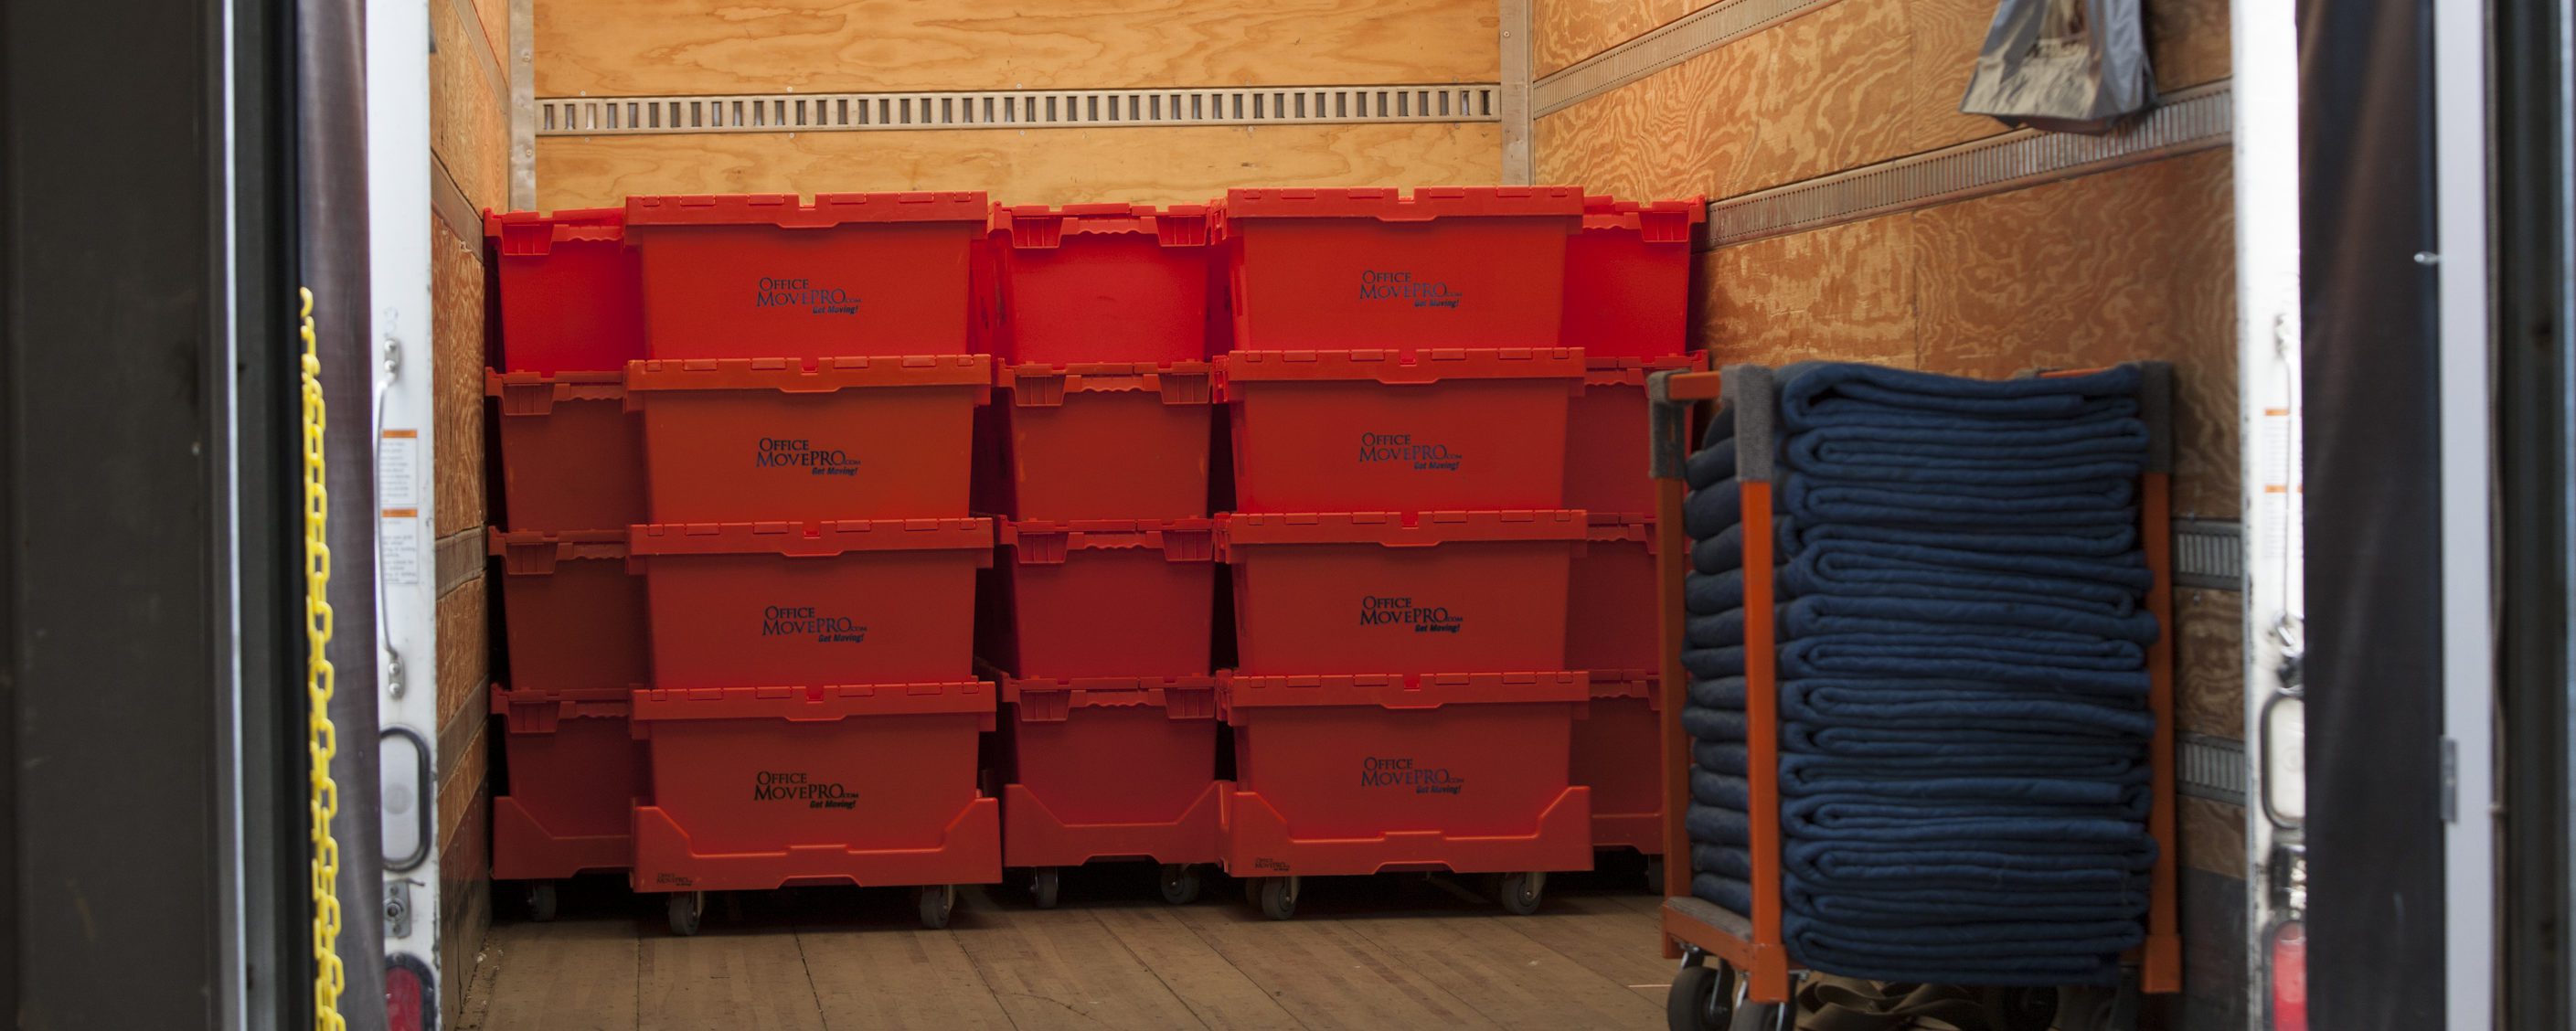 Crate Rentals, Packing Supplies, Moving Bins, Moving Boxes